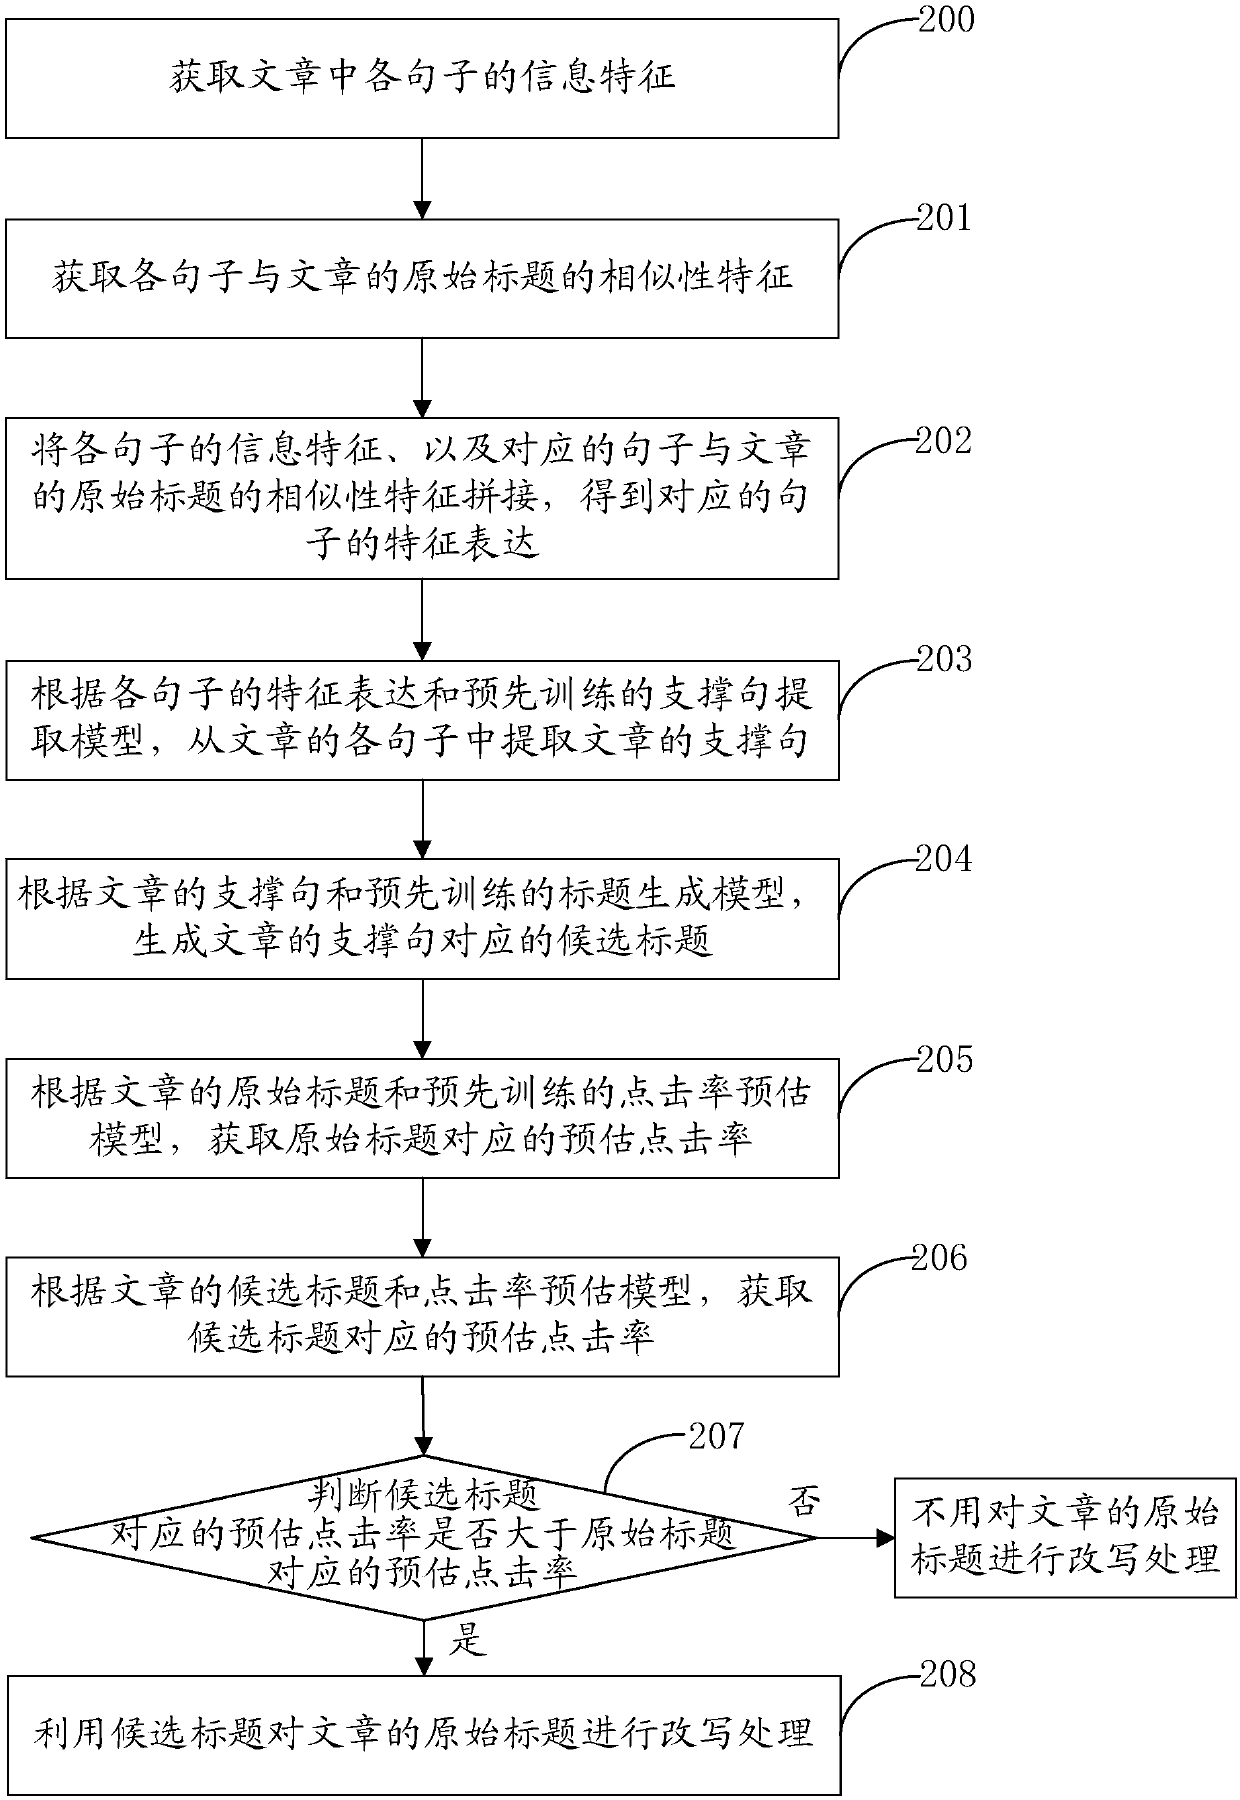 Artificial intelligence-based title rewriting processing method, device and readable medium